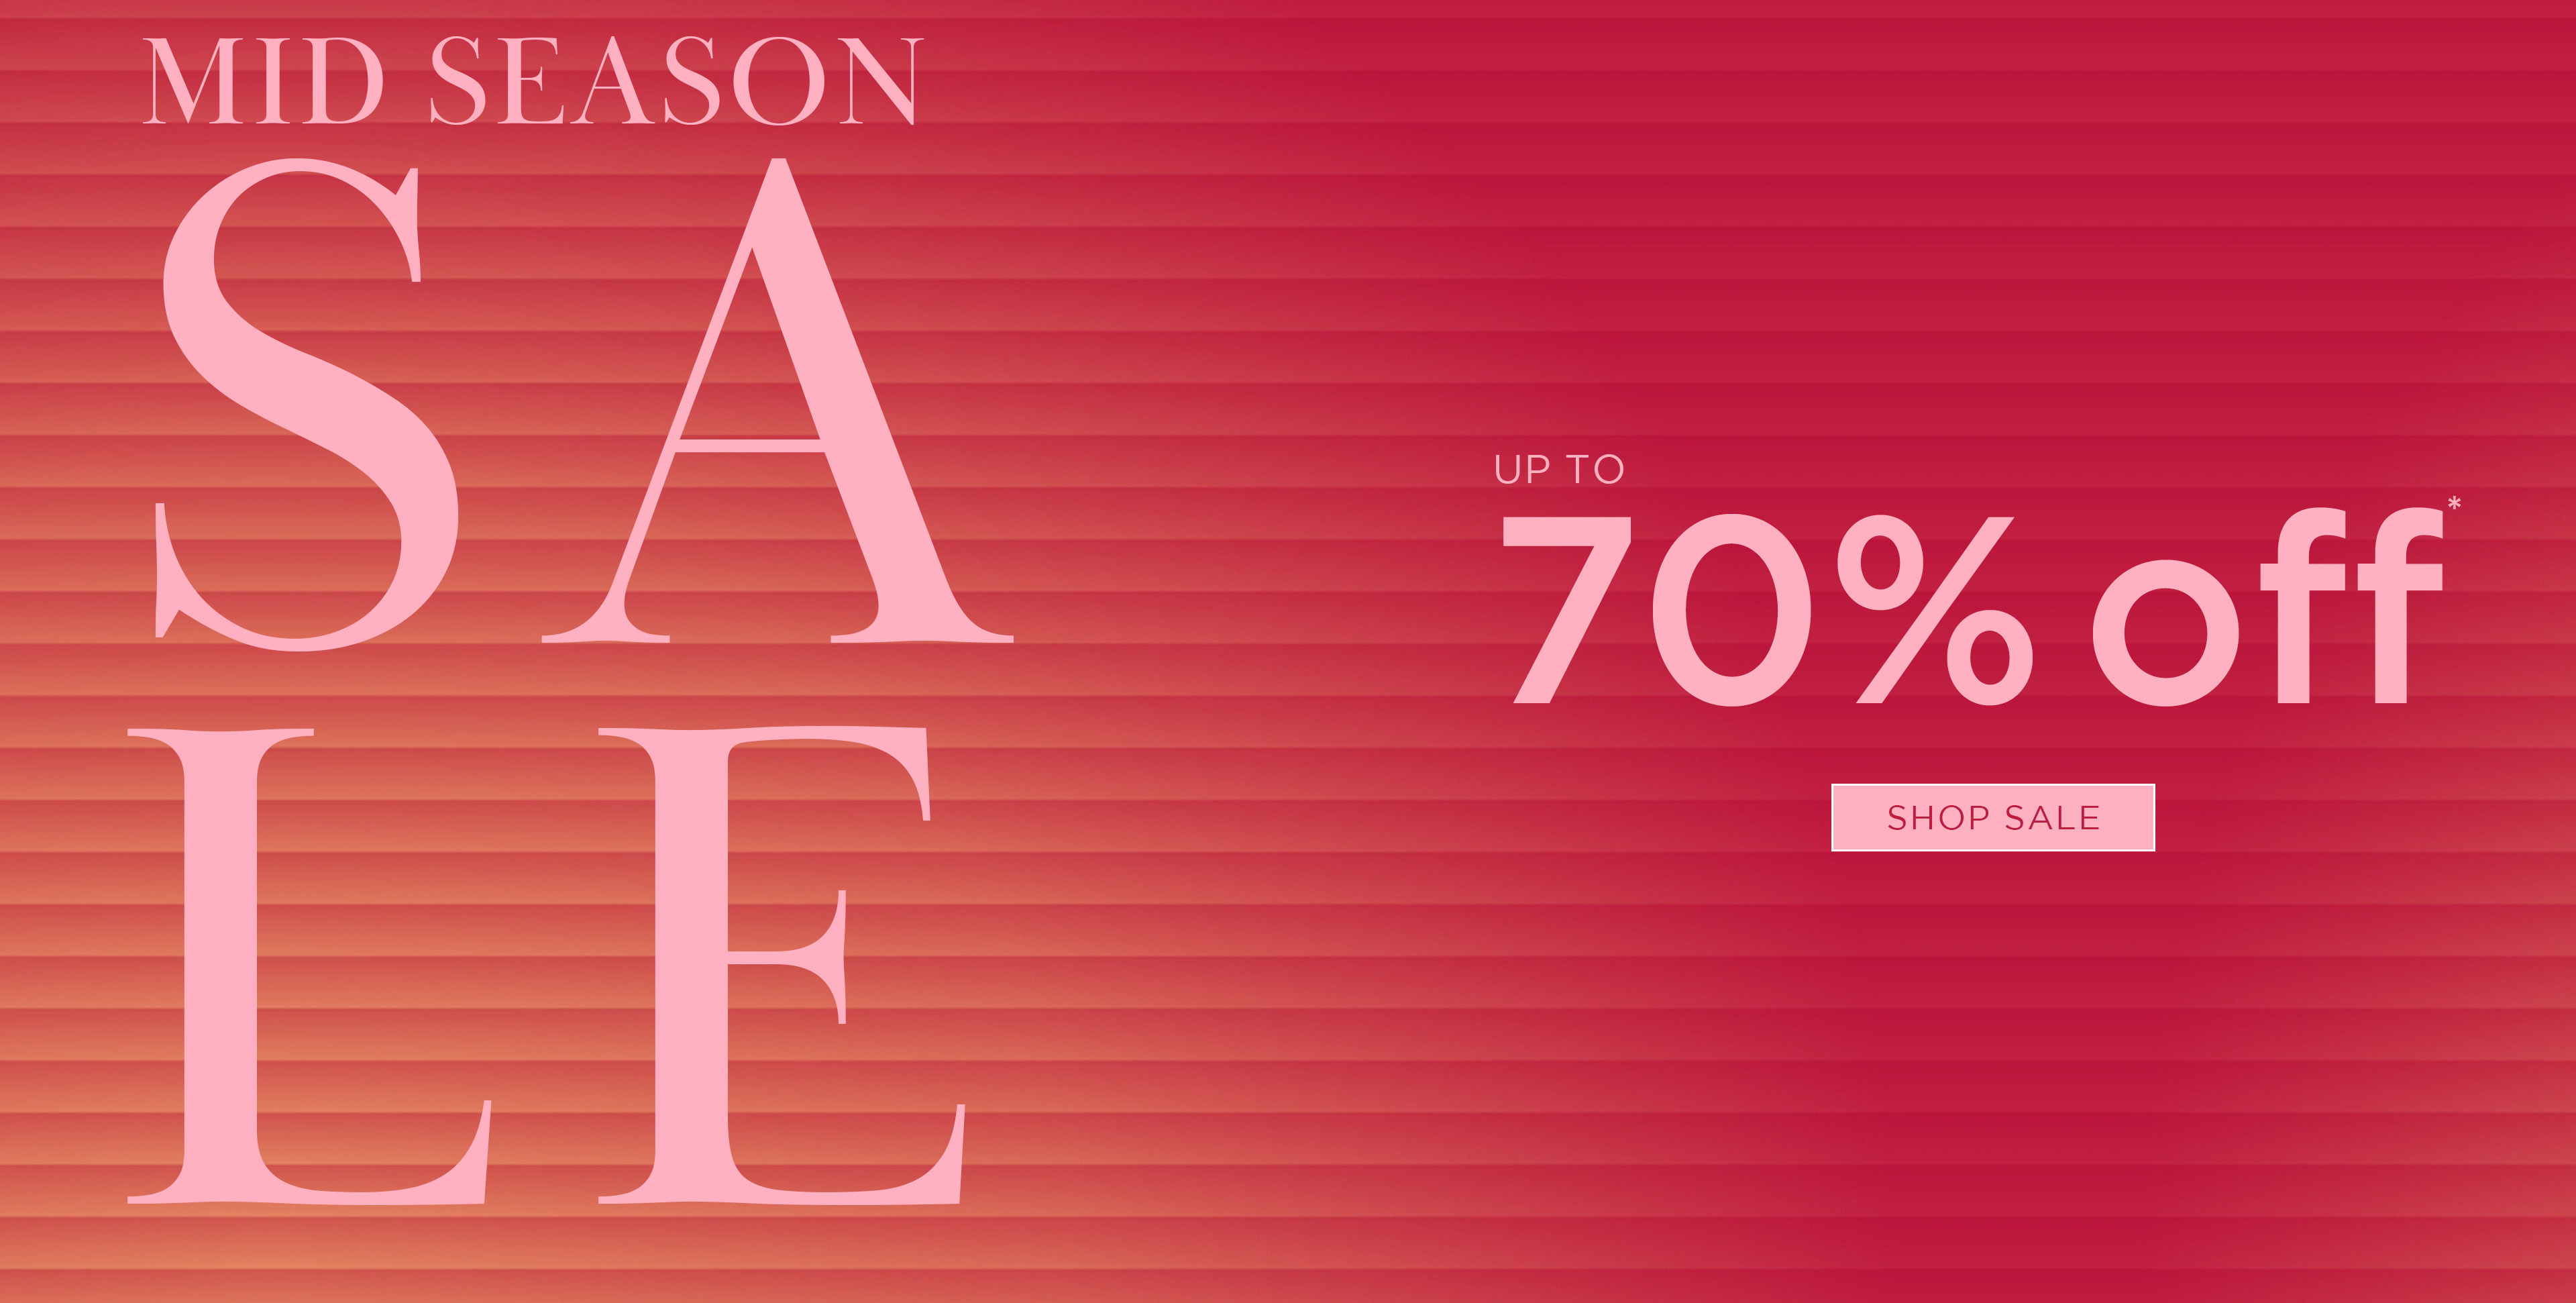 NONI B UP TO 70% OFF* SALE